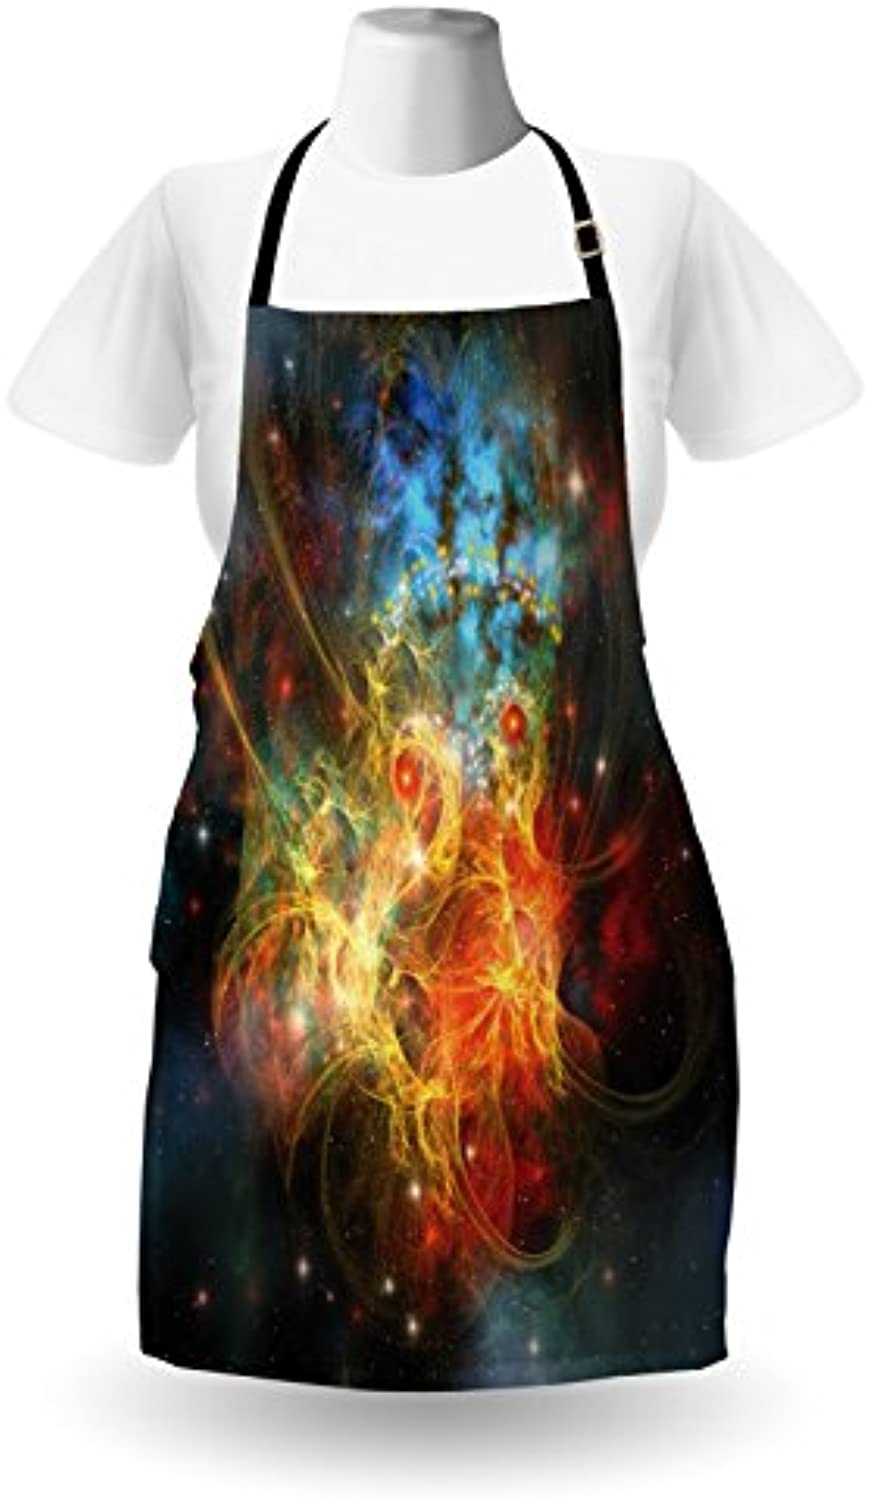 Granbey Outer Space Apron  Cartoon Nebula Gas Expanse Outer Space Universe Matters in Astral Zone  Unisex Kitchen Bib with Adjustable Neck for Cooking Gardening  Adult Size  Orange Teal